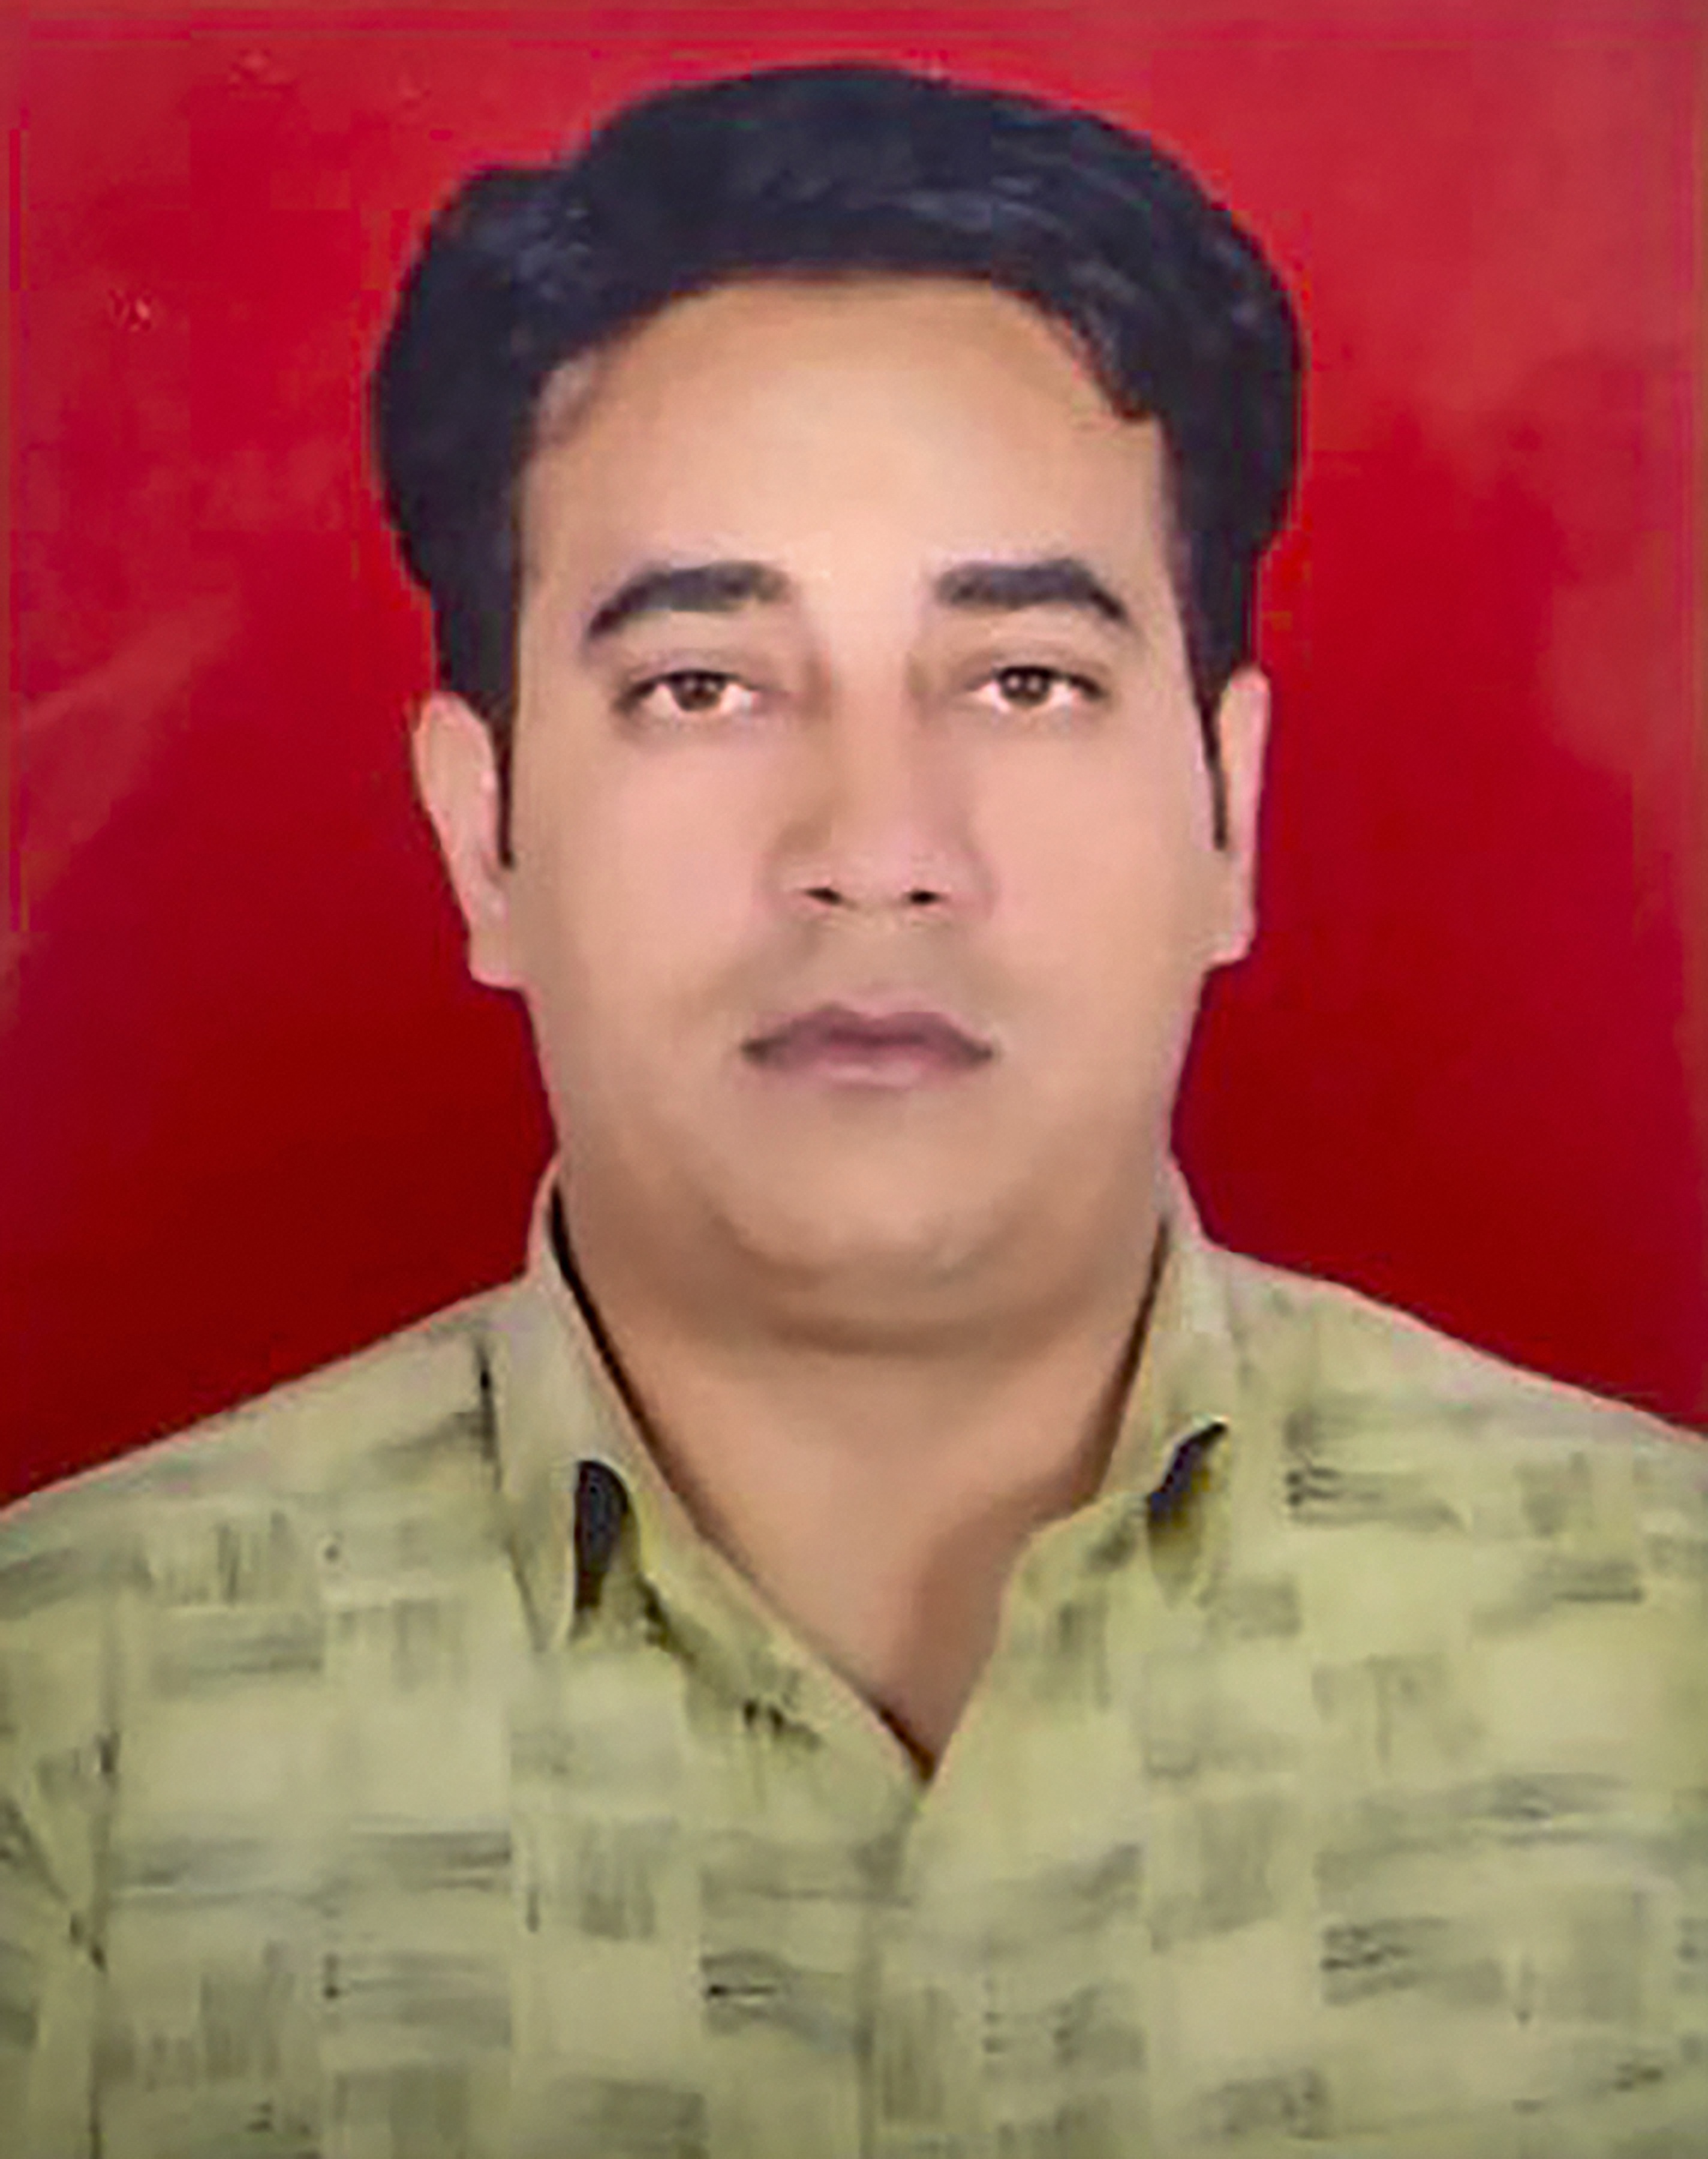 The family of Ankit Sharma (in picture), who was found dead in a drain near his home in riot-hit Chand Bagh area, has accused Hussain of being behind the killing. On the complaint of Sharma's father, the police registered an FIR against Hussain.

